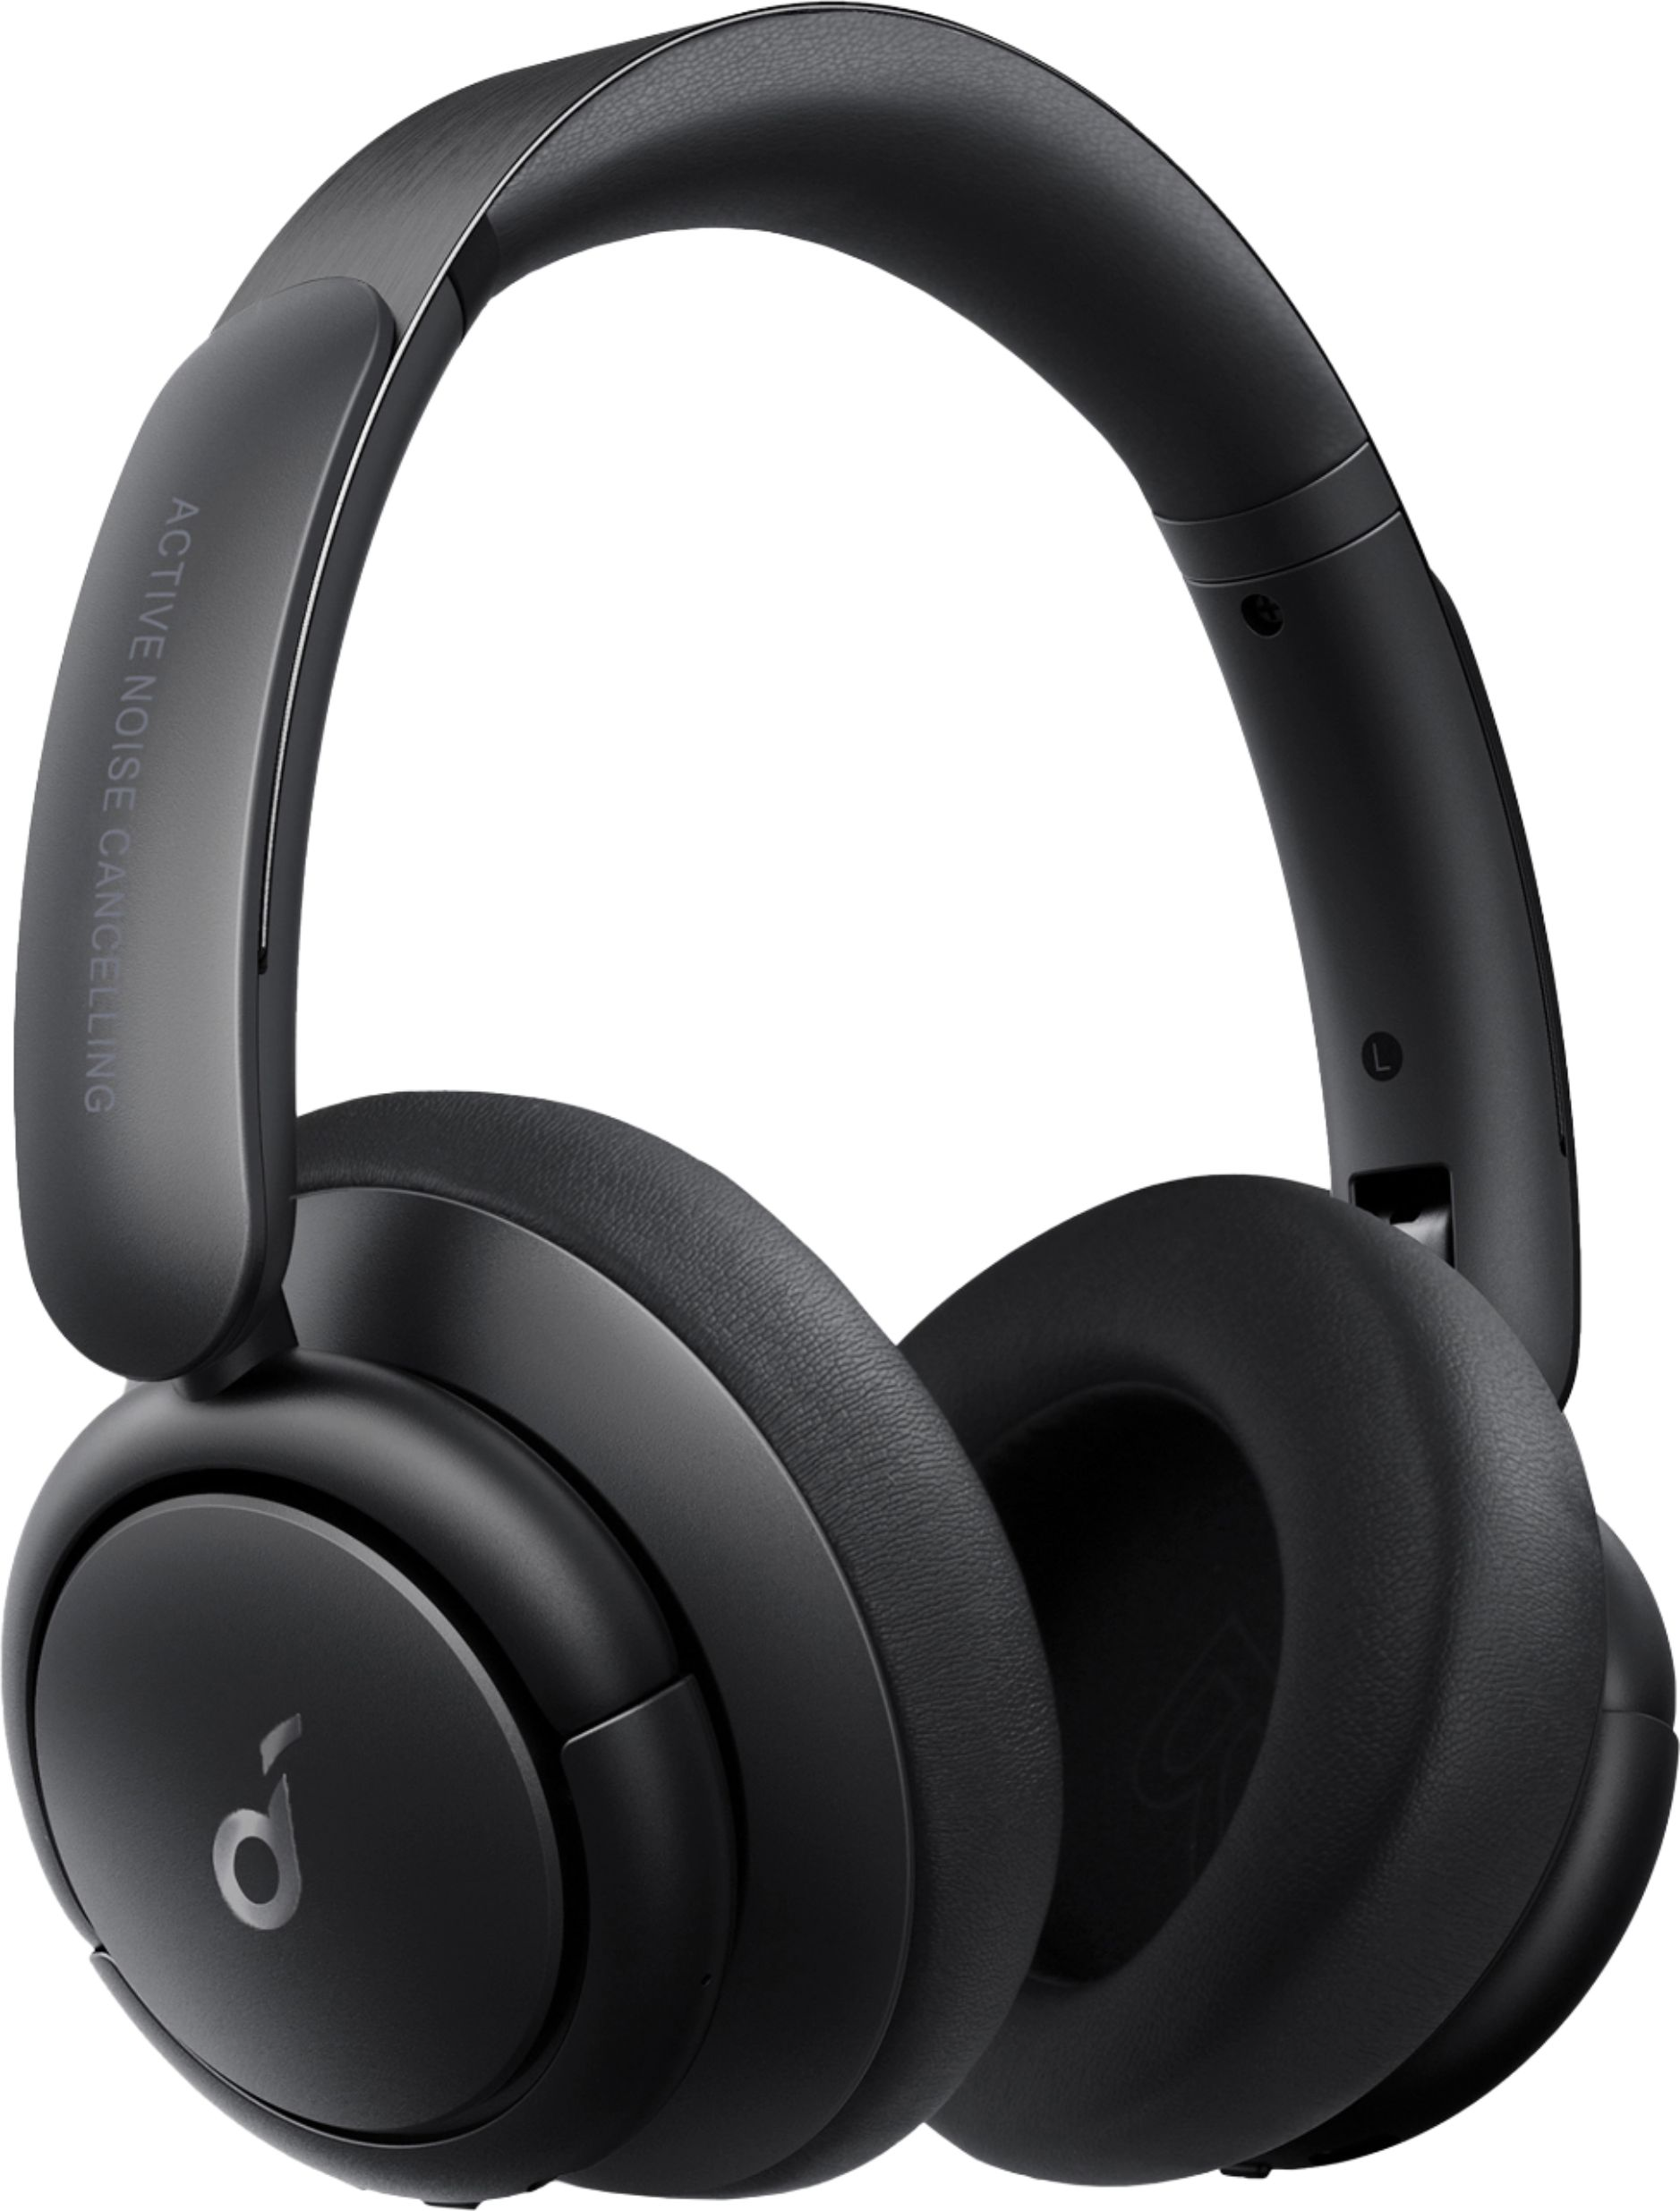 Anker Soundcore Life Q30 / Life Tune XR Headphones with ANC at Best Buy $70